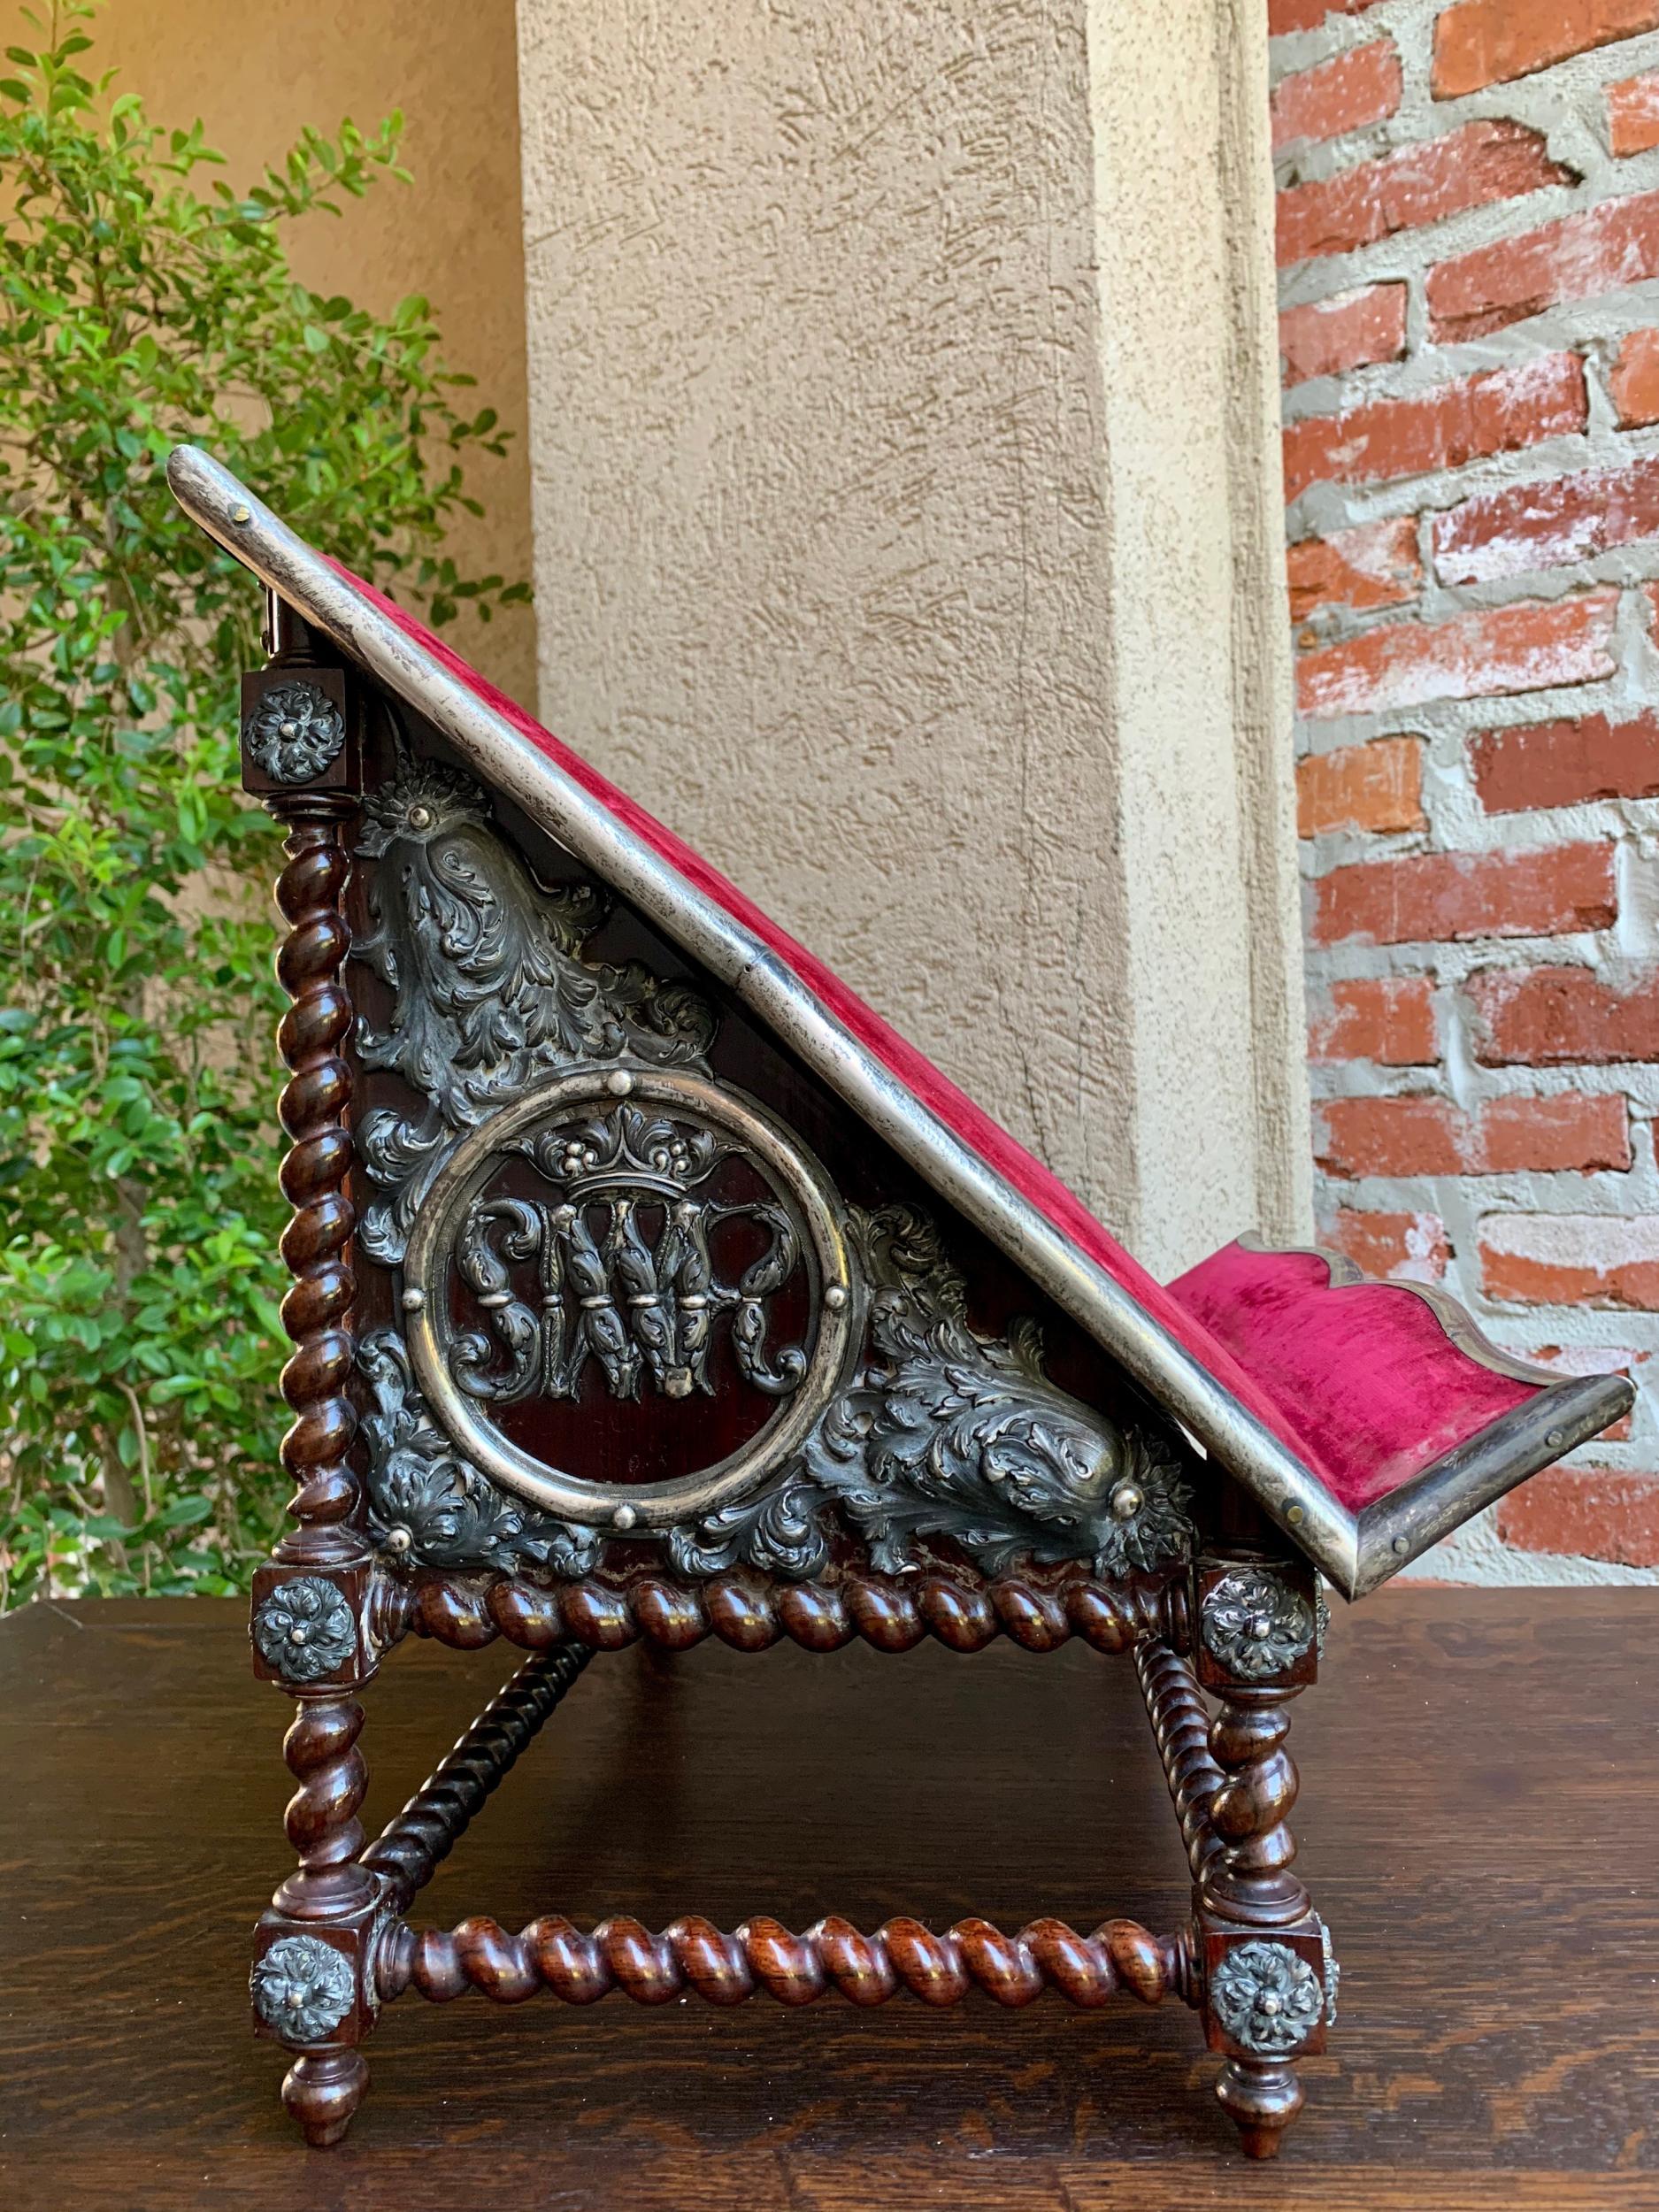 19th century French rosewood bible book stand silver catholic sacred heart

~ Direct from France
~ Beautiful 19th century French Bible stand, with intriguing features and superb details!
~ Lovely rosewood with barley twist legs, full double